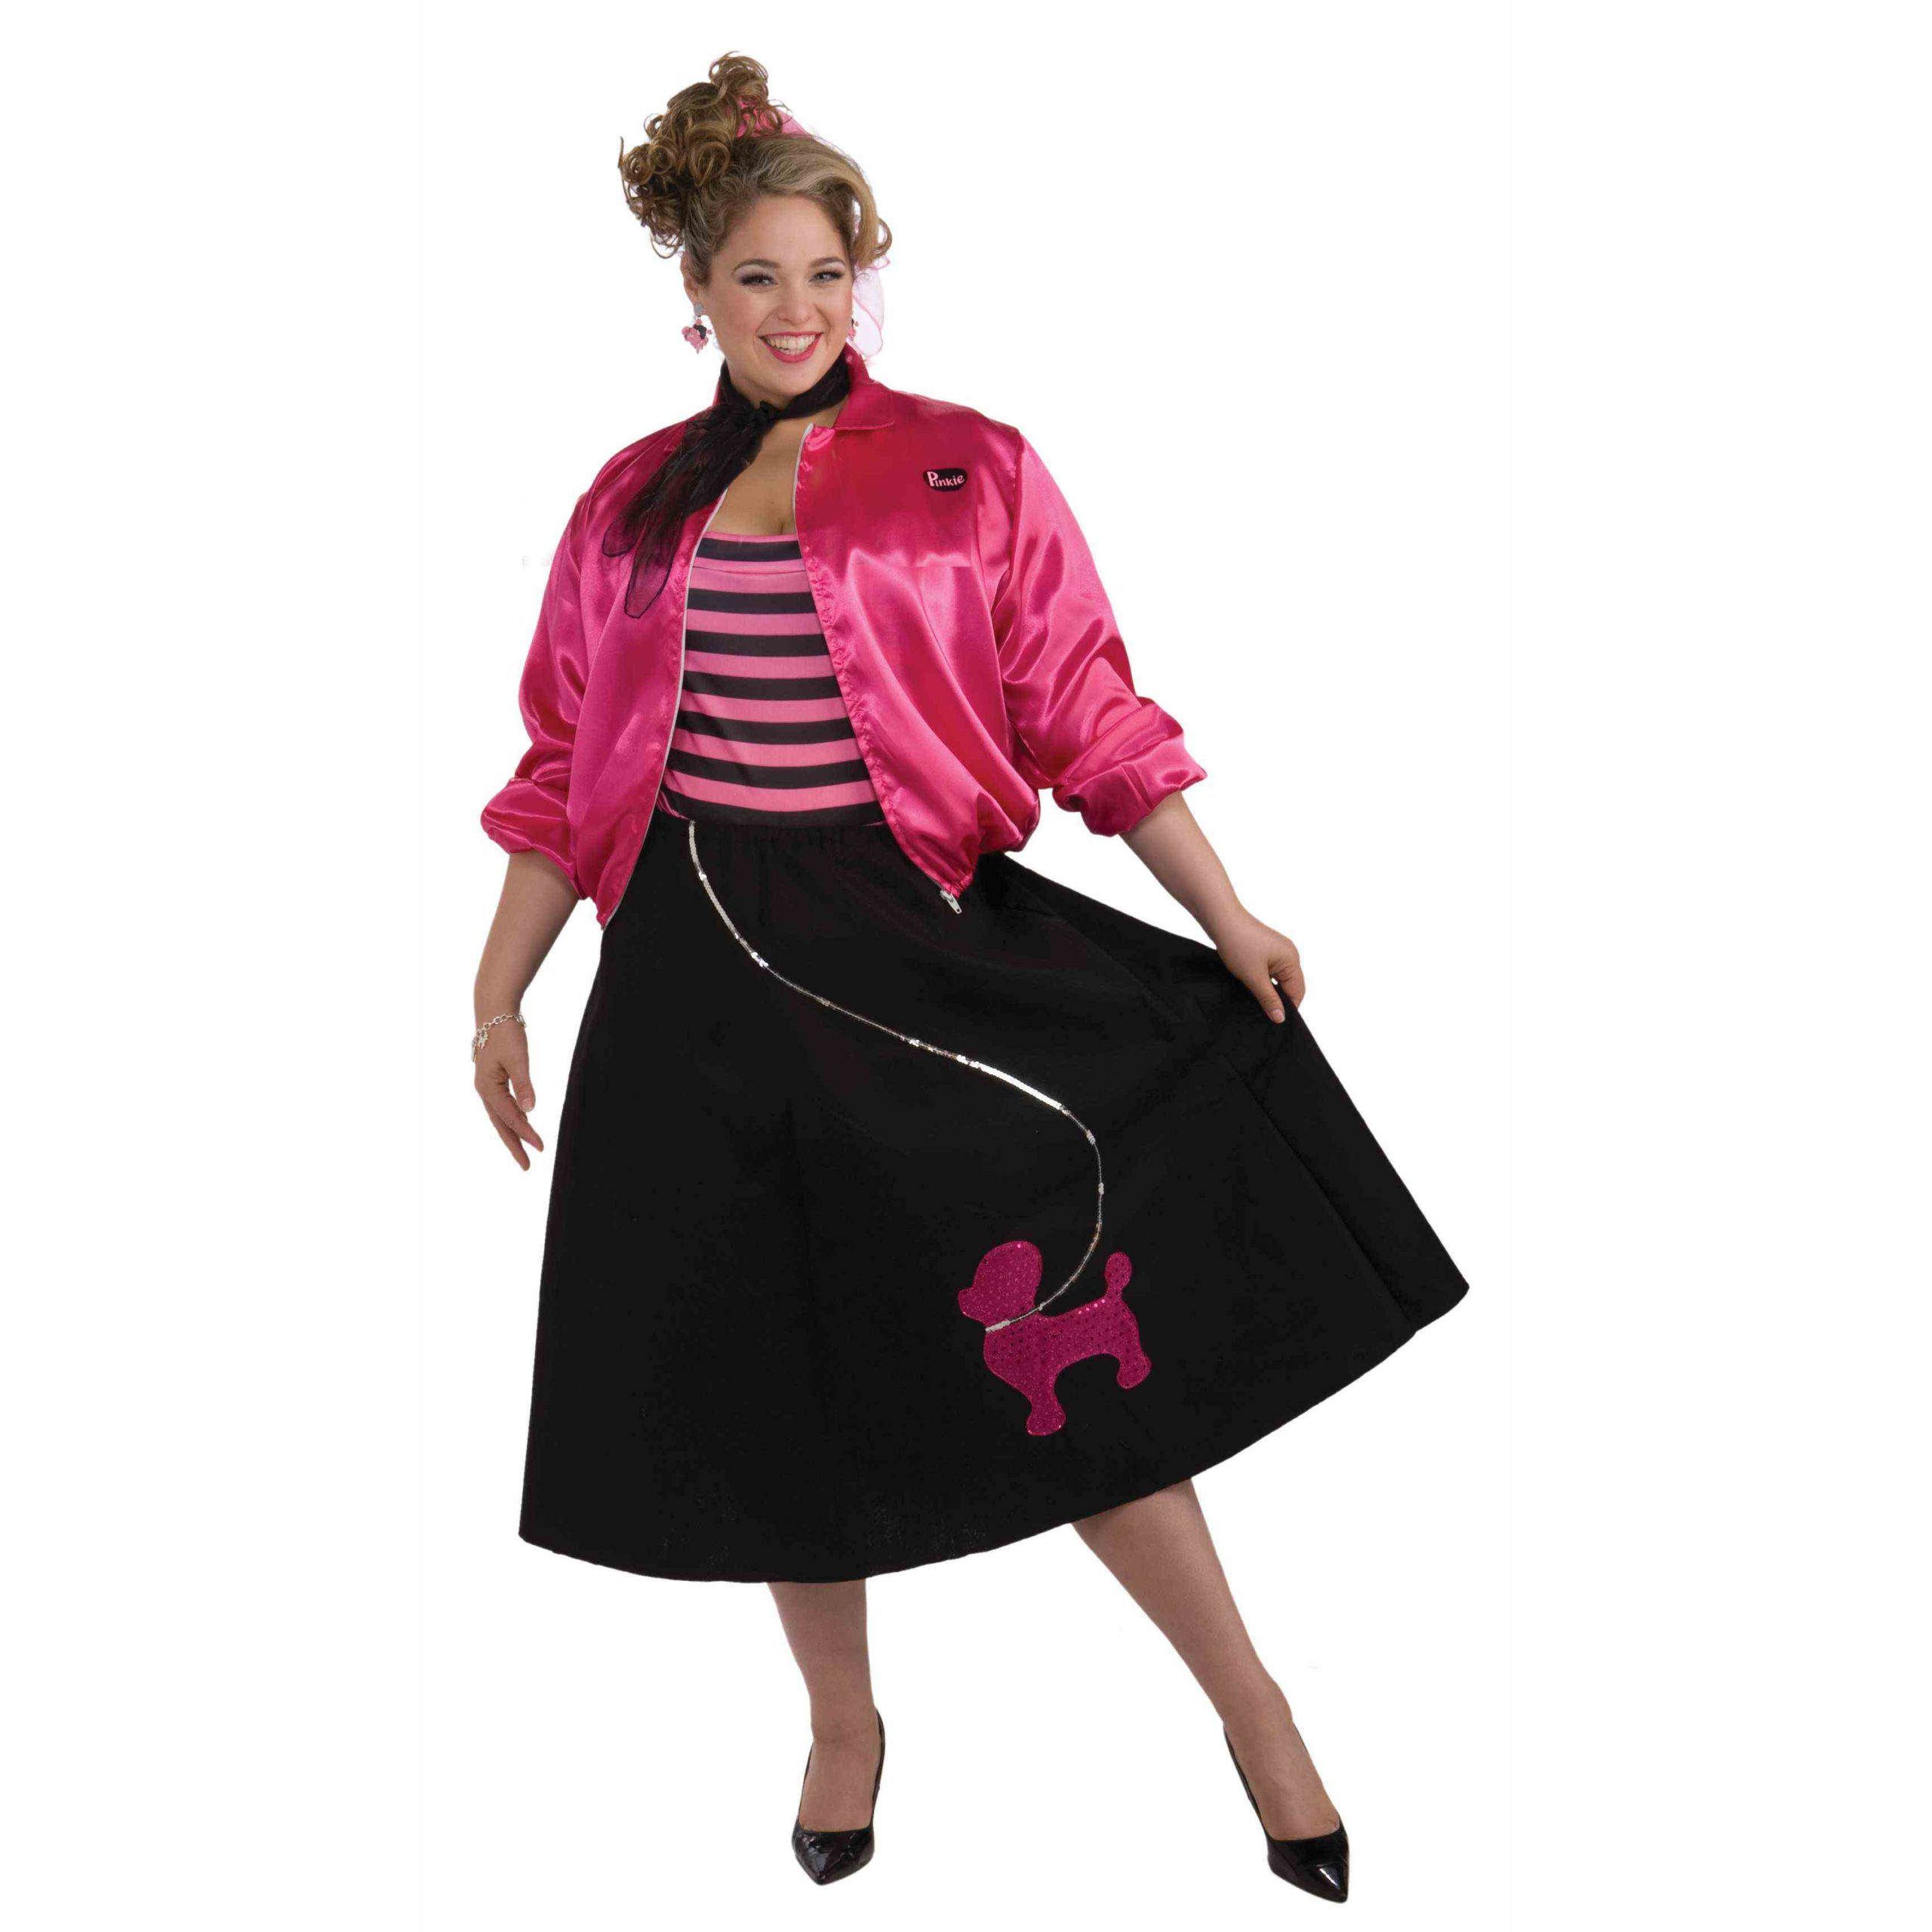 radikal Ampere At passe Poodle Skirt w/ Pink Jacket – Beauty and the Beast Costumes, Chattanooga